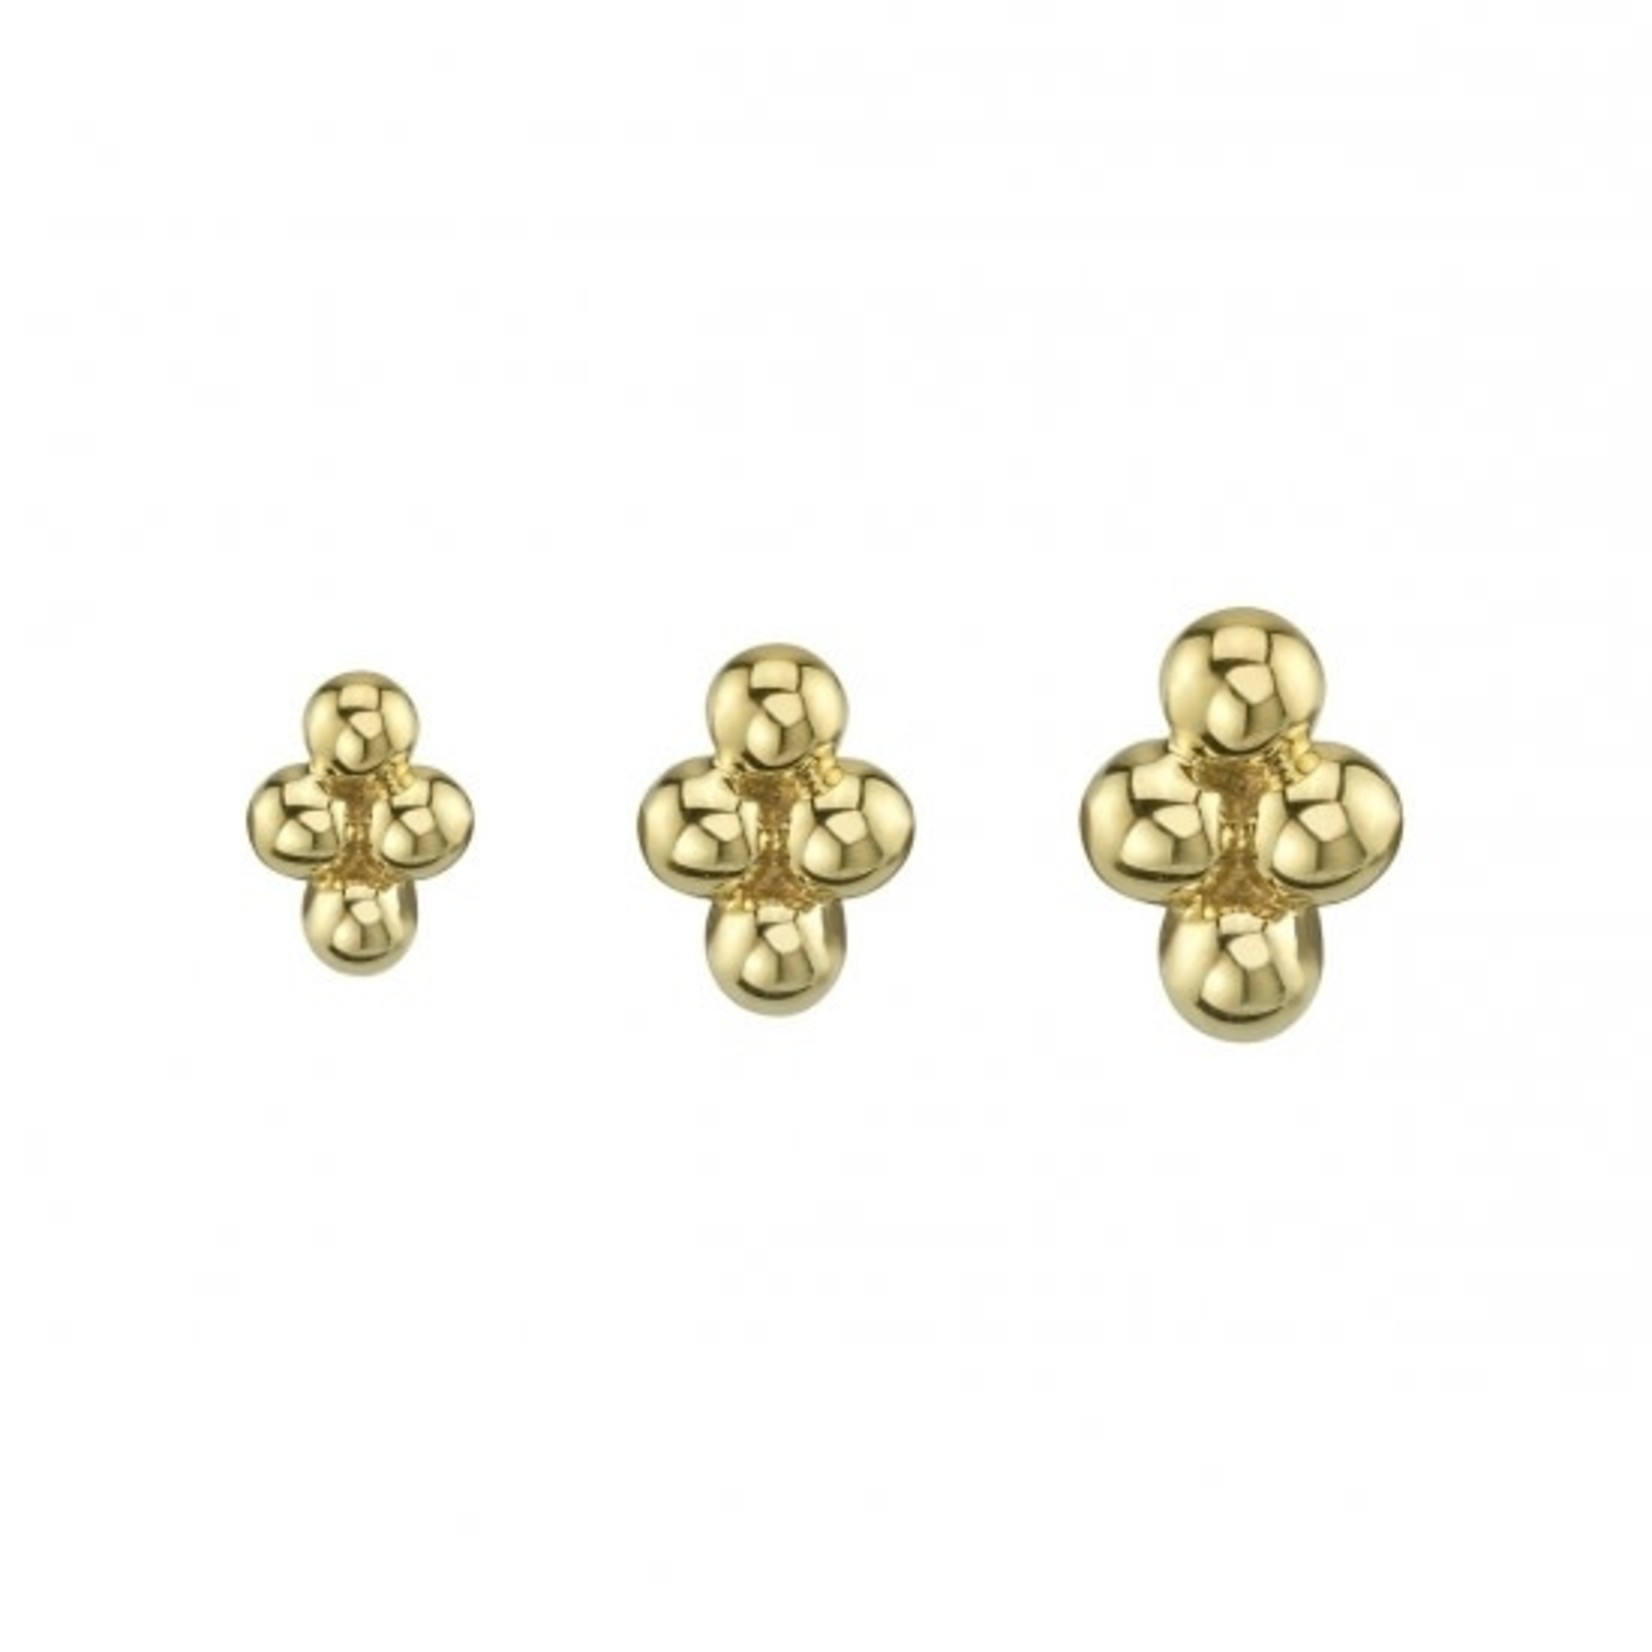 Body Vision Los Angeles 1.75mm Gold Quad Bead Cluster-BVLA